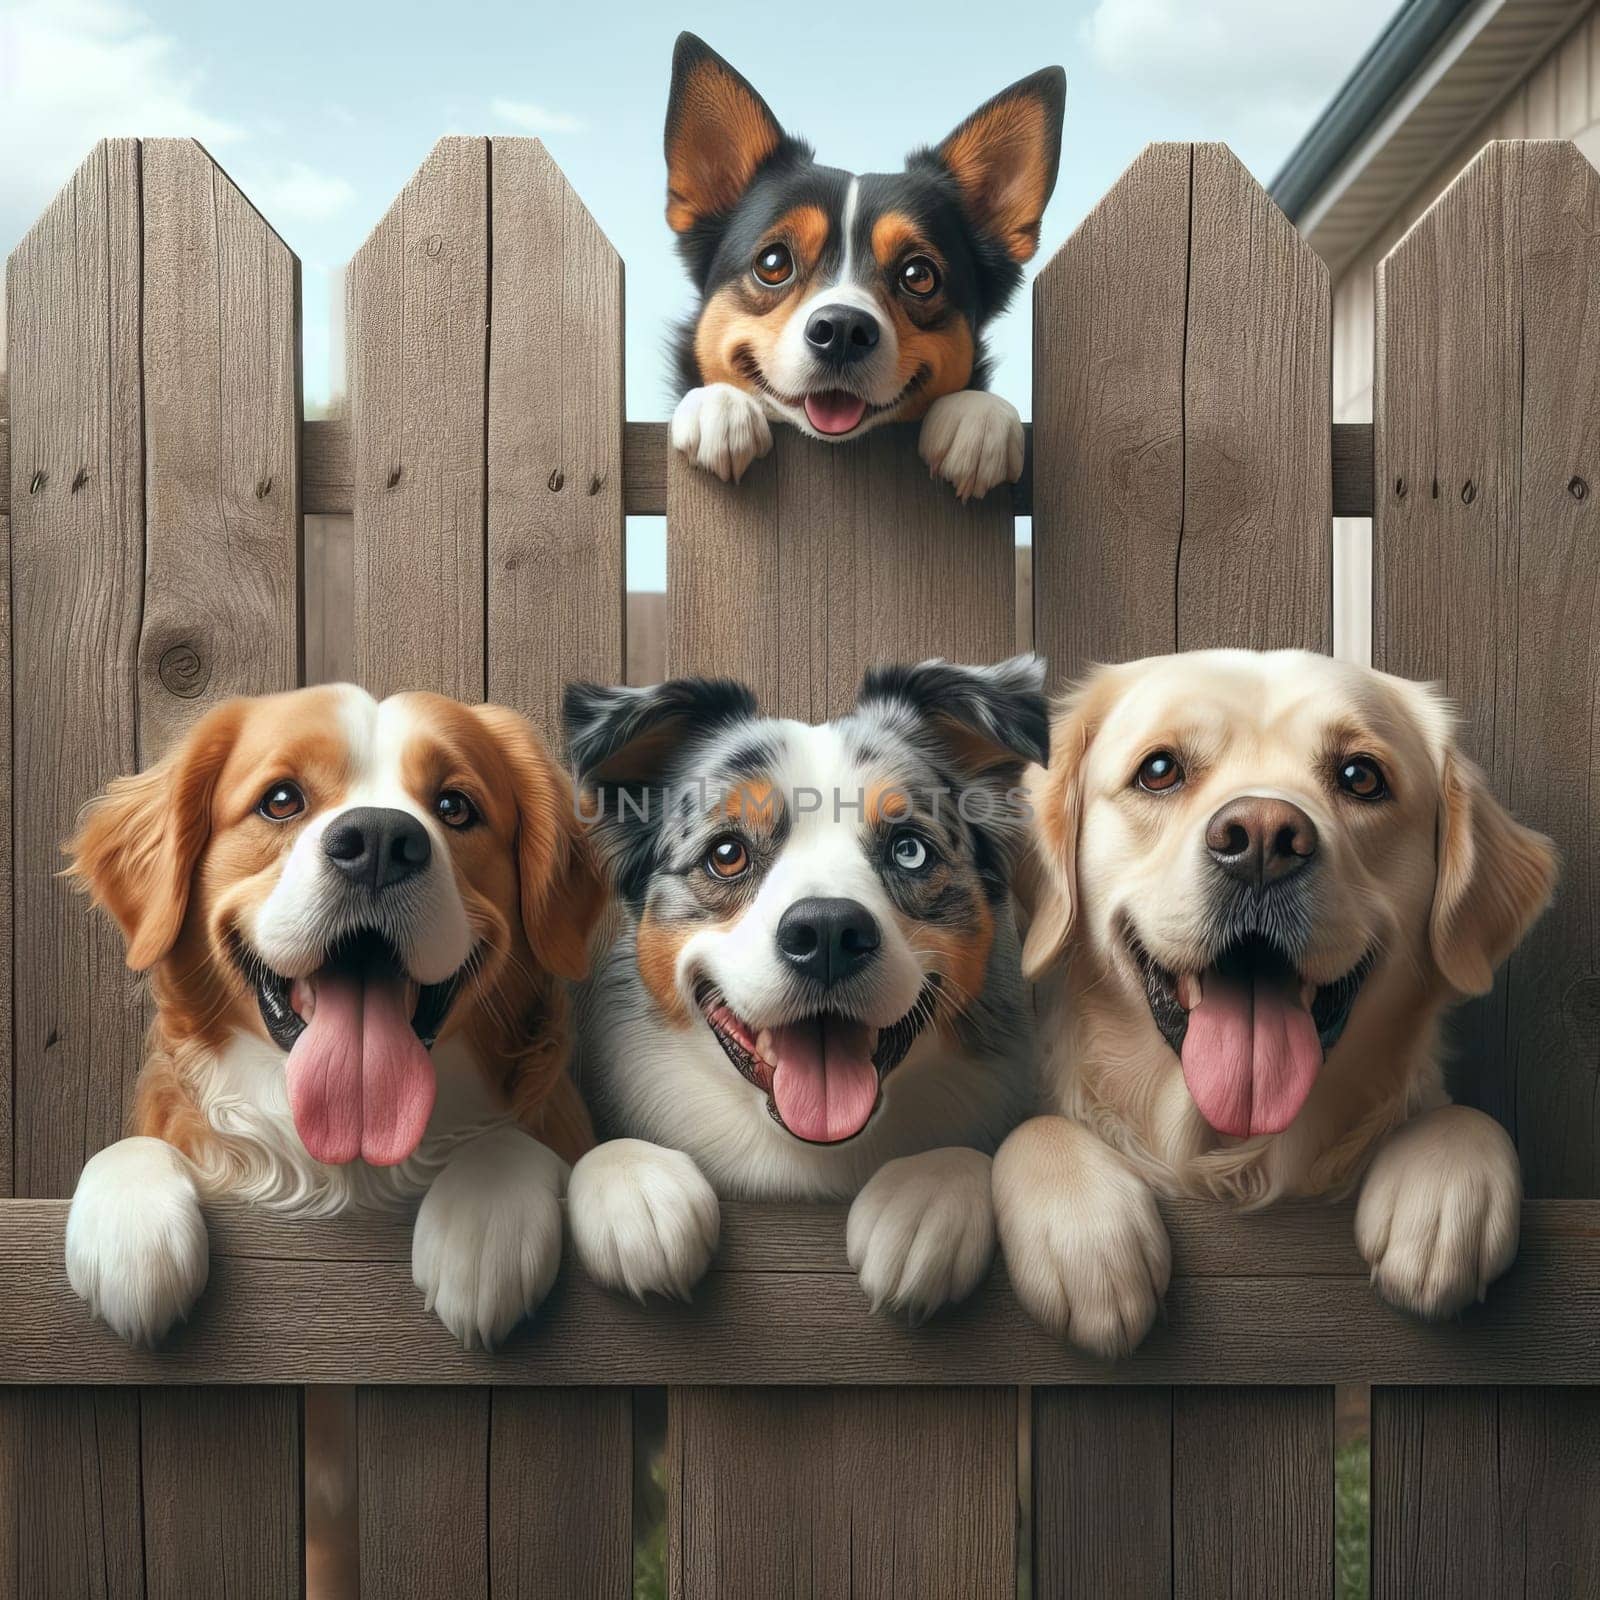 Four happy dogs of different breeds peeking over a wooden fence, showcasing their playful and friendly nature. by sfinks